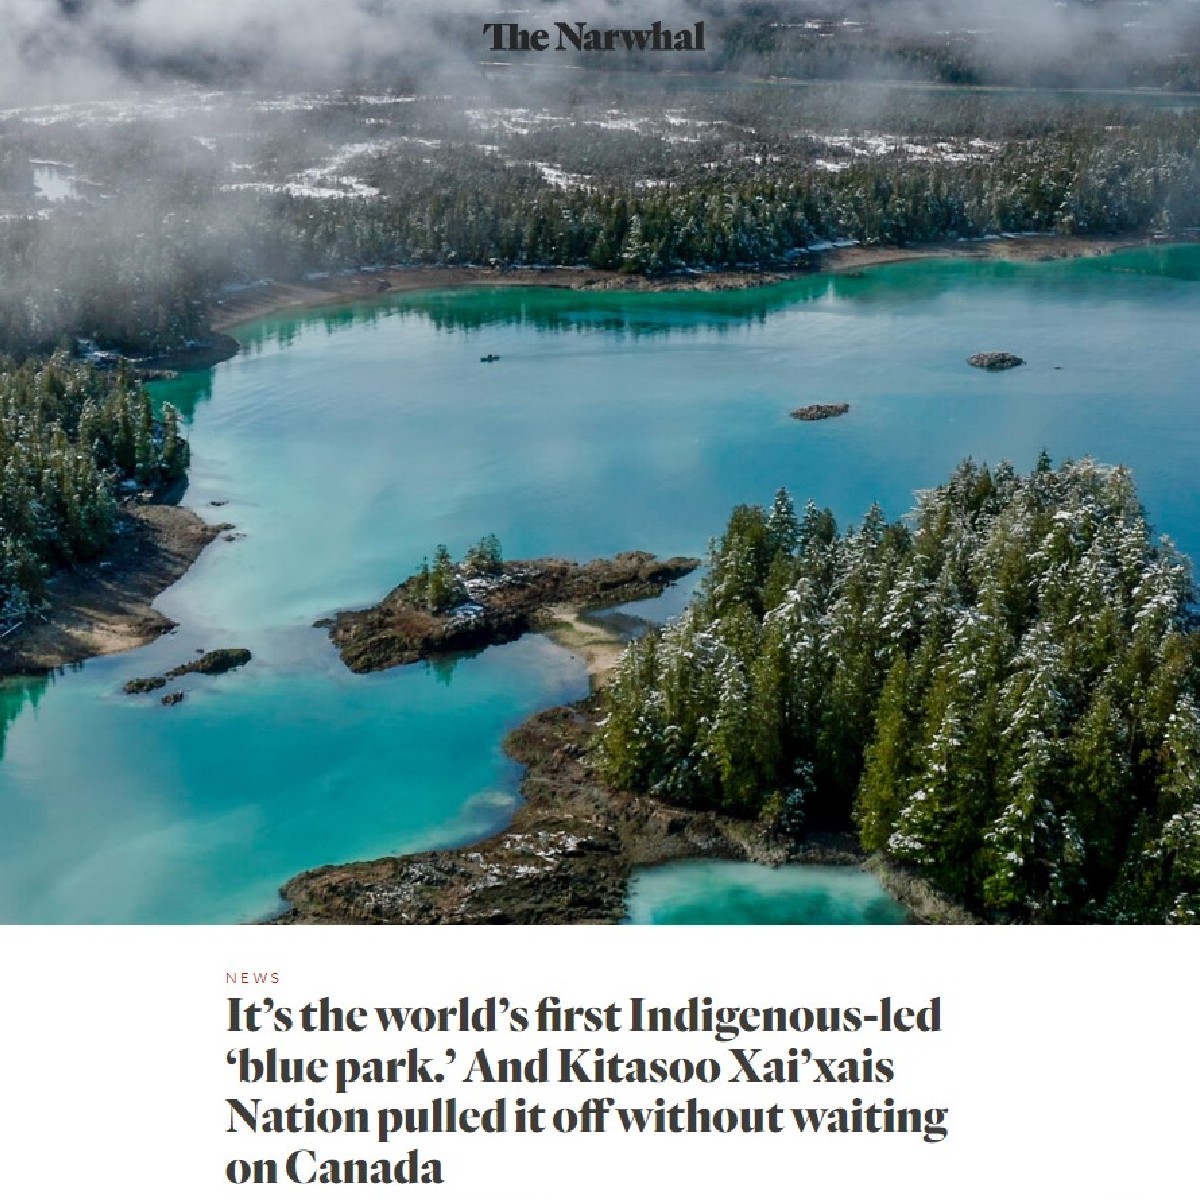 'A marine protected area managed by Kitasoo Xai’xais Nation has been designated a ‘blue park’ — an internationally recognized example of excellence in marine protection. And it is the first Indigenous-led blue park in the world.' 💙 thenarwhal.ca/bc-first-natio…